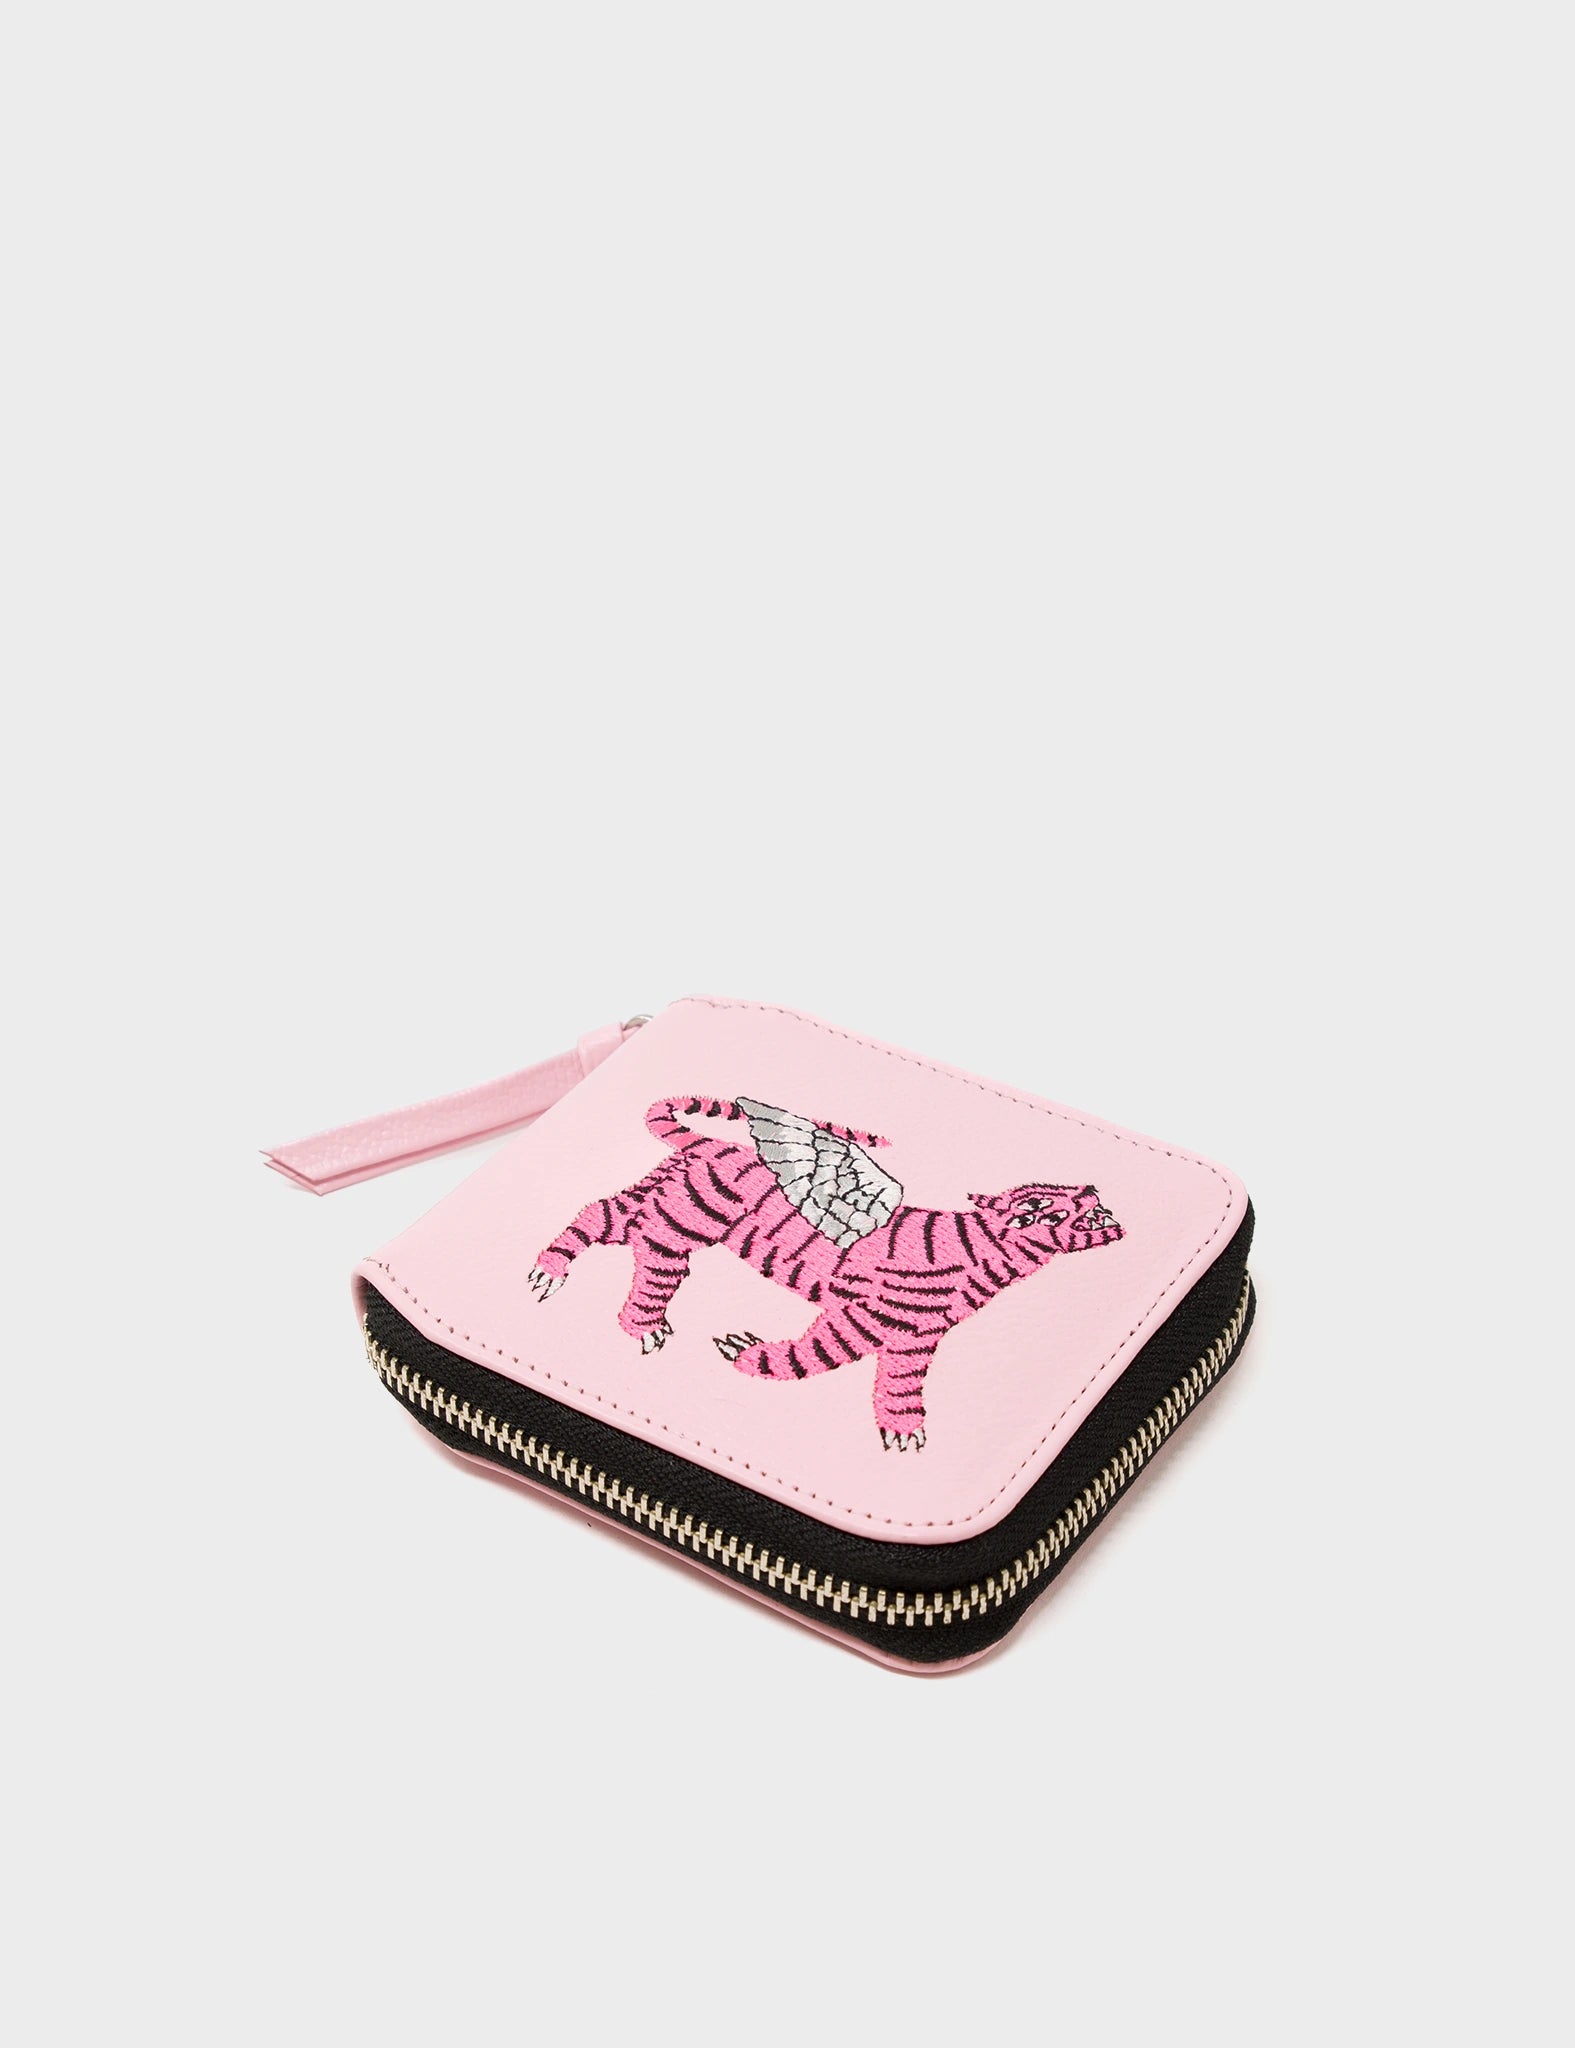 Fedor Parfait Pink And Blue Leather Wallet - Tiger Embroidery - Side